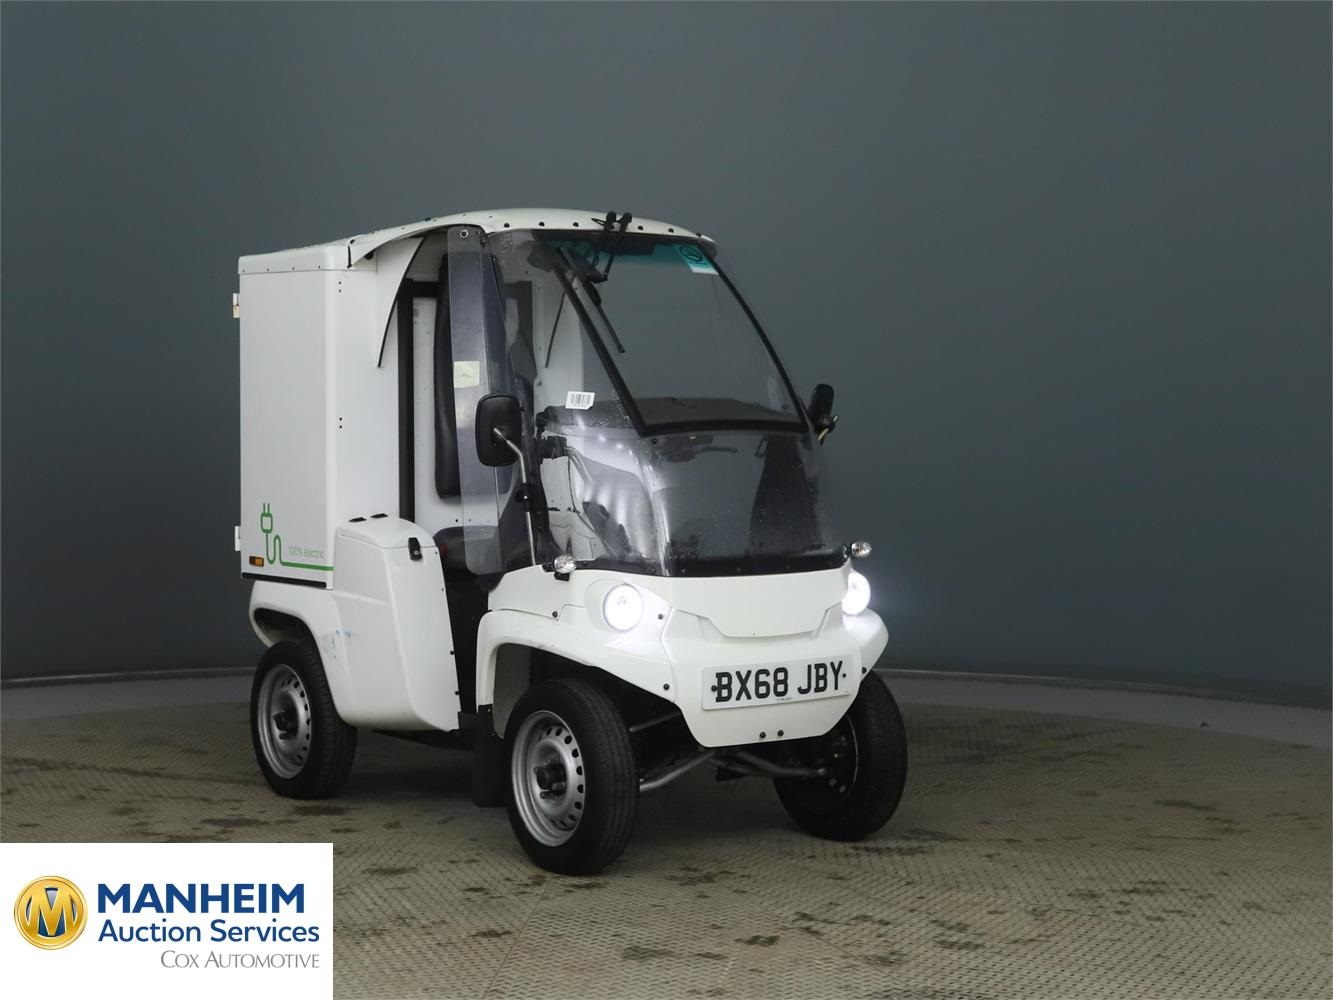 PAXSTER
DELIVERY ELECTRIC
BOX VEHICLE 1 Seat